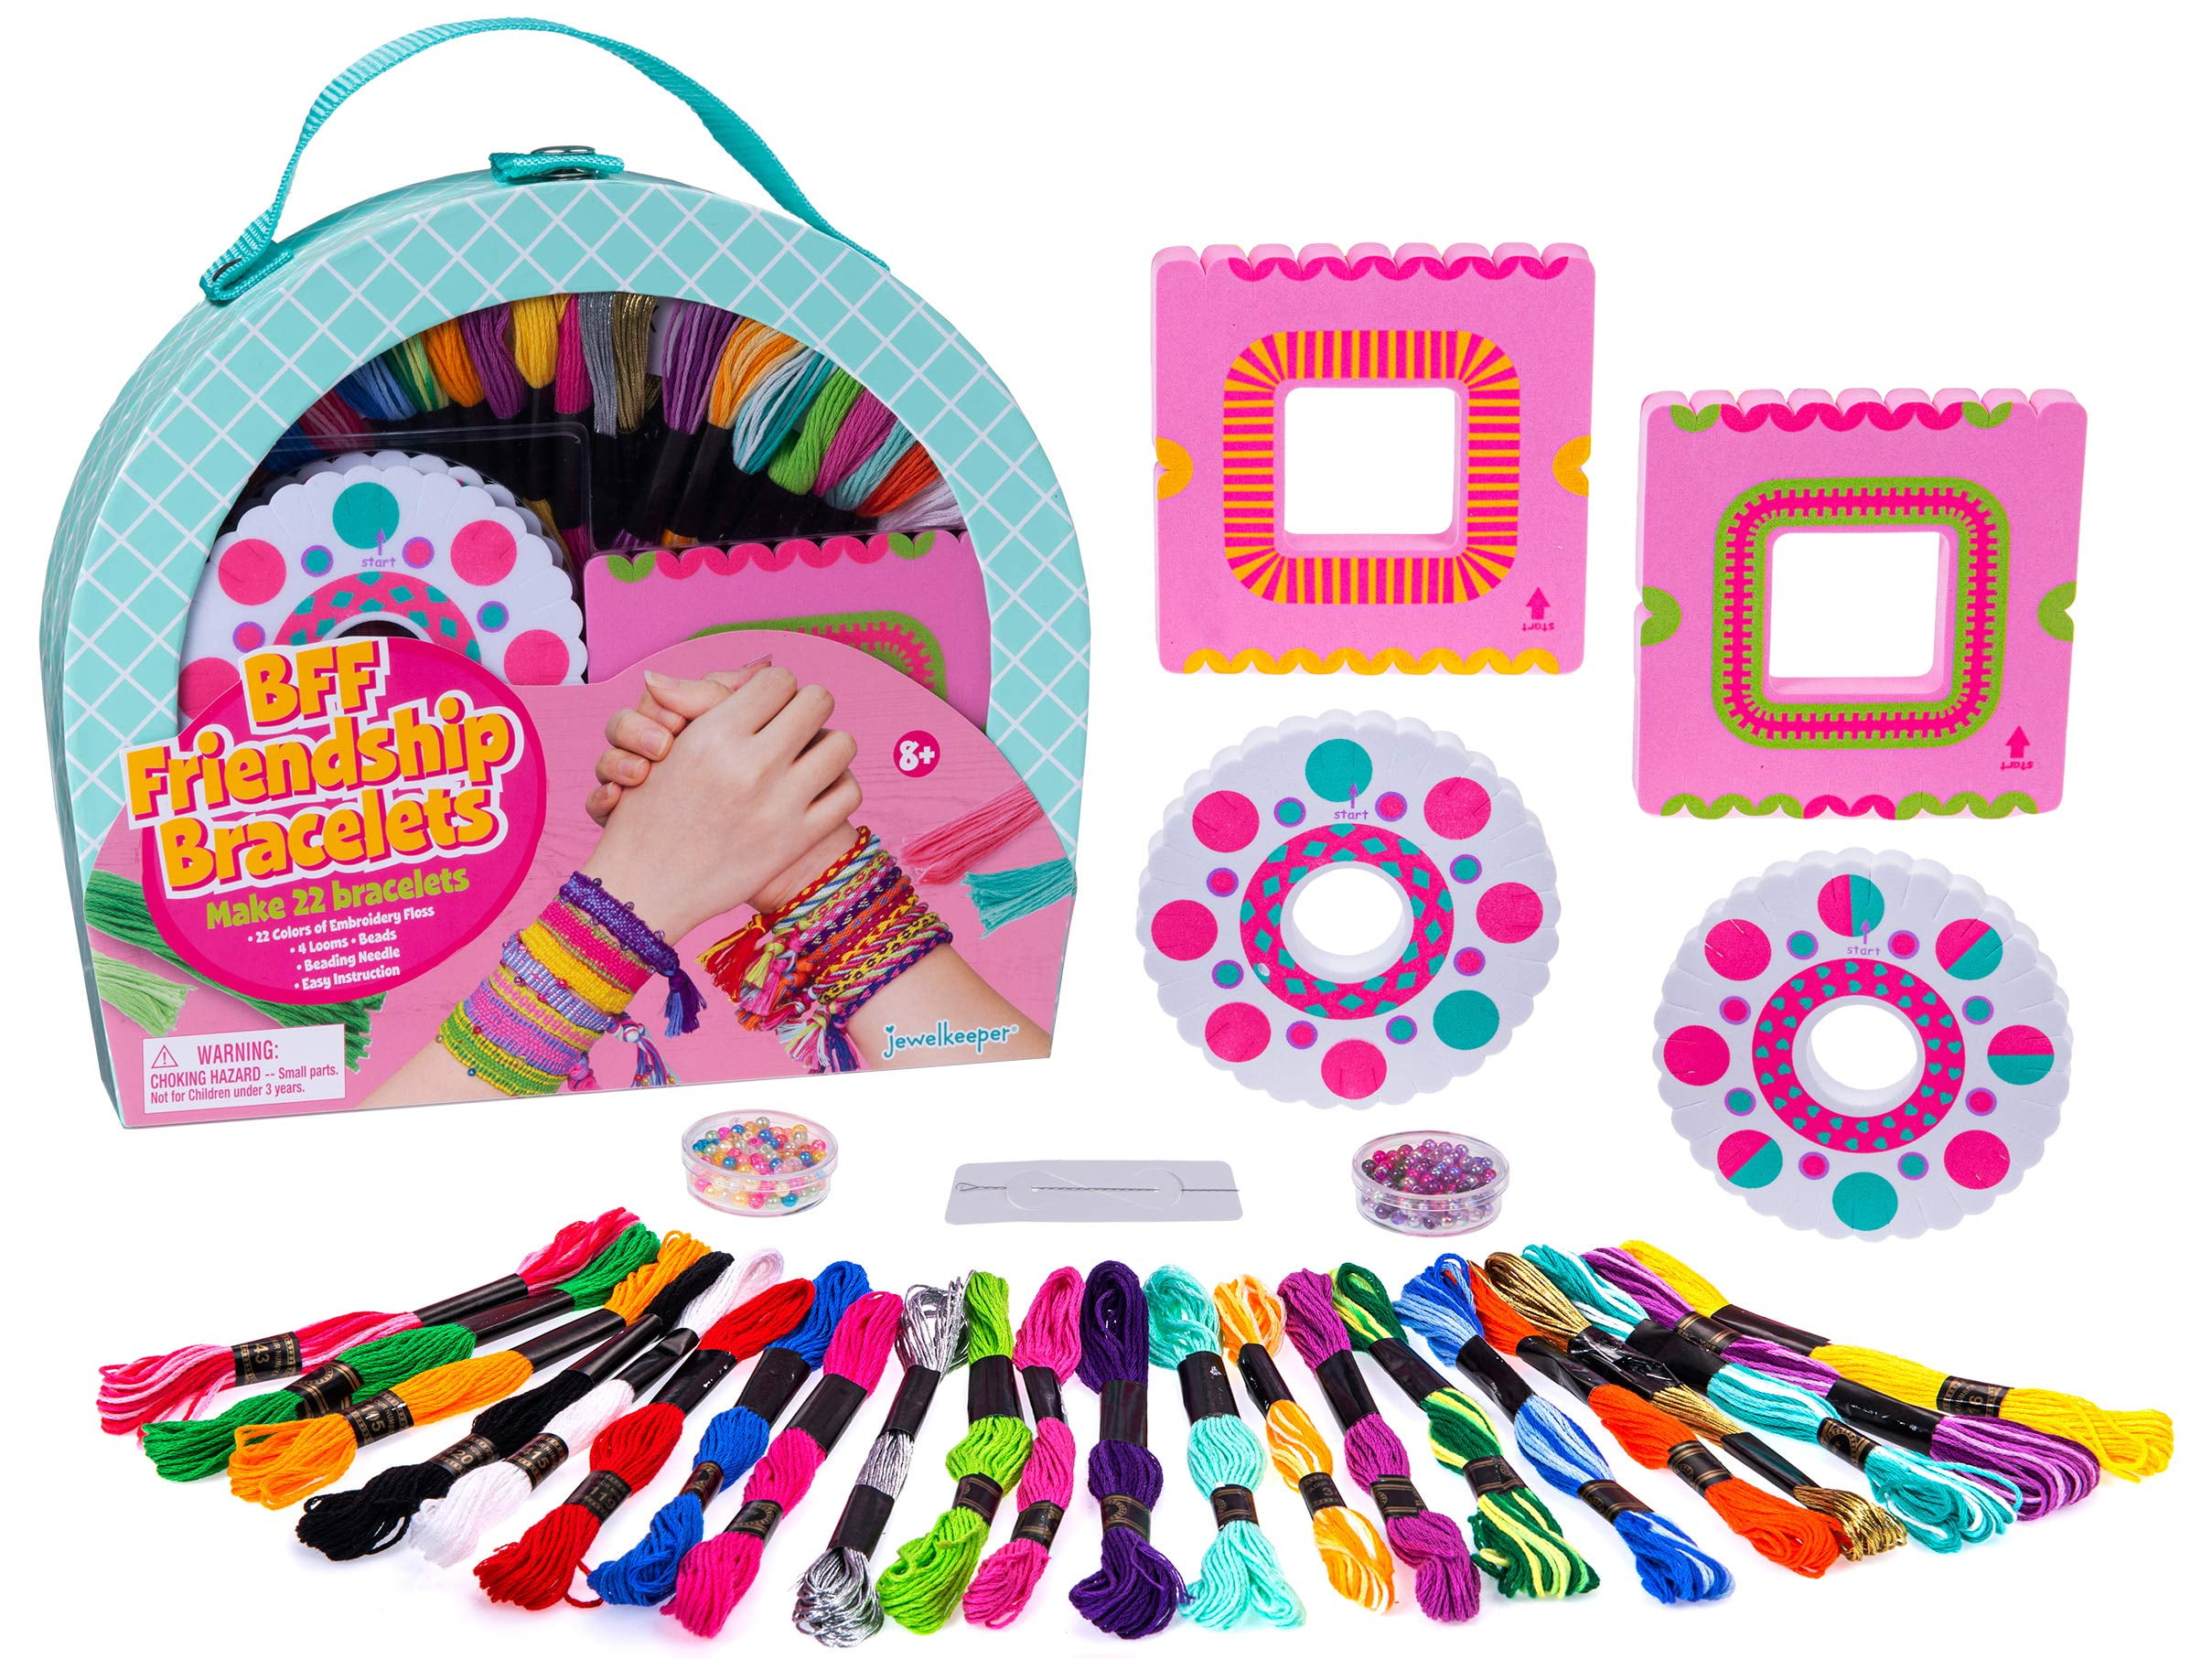 Kids Jewelry Making Kits in Arts & Crafts for Kids 